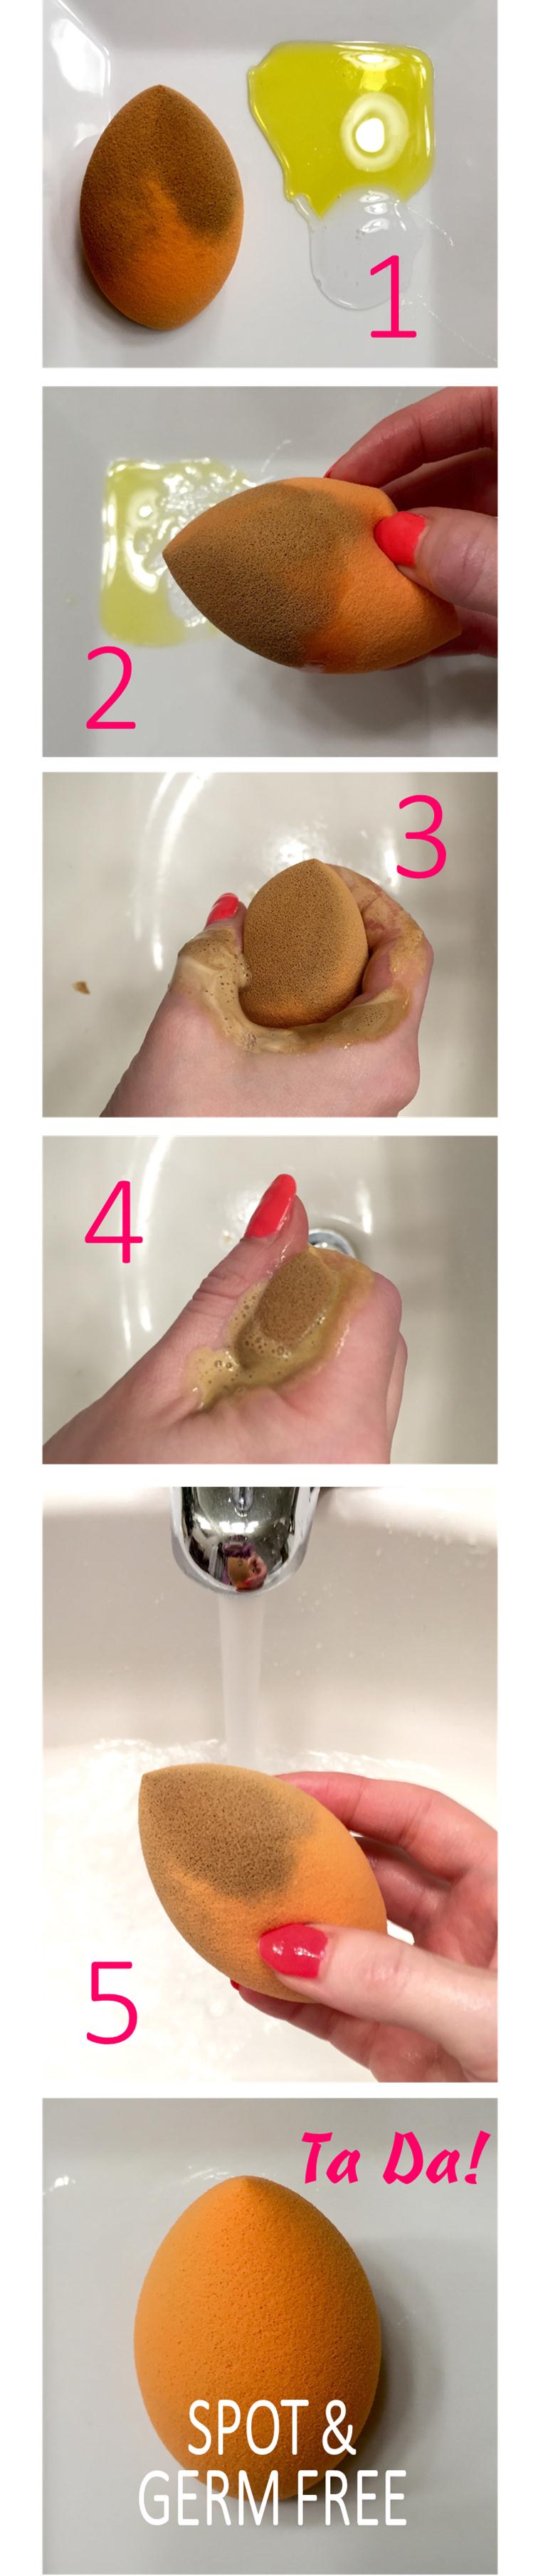 Step By Step Tutorial for a Clean Complexion Sponge